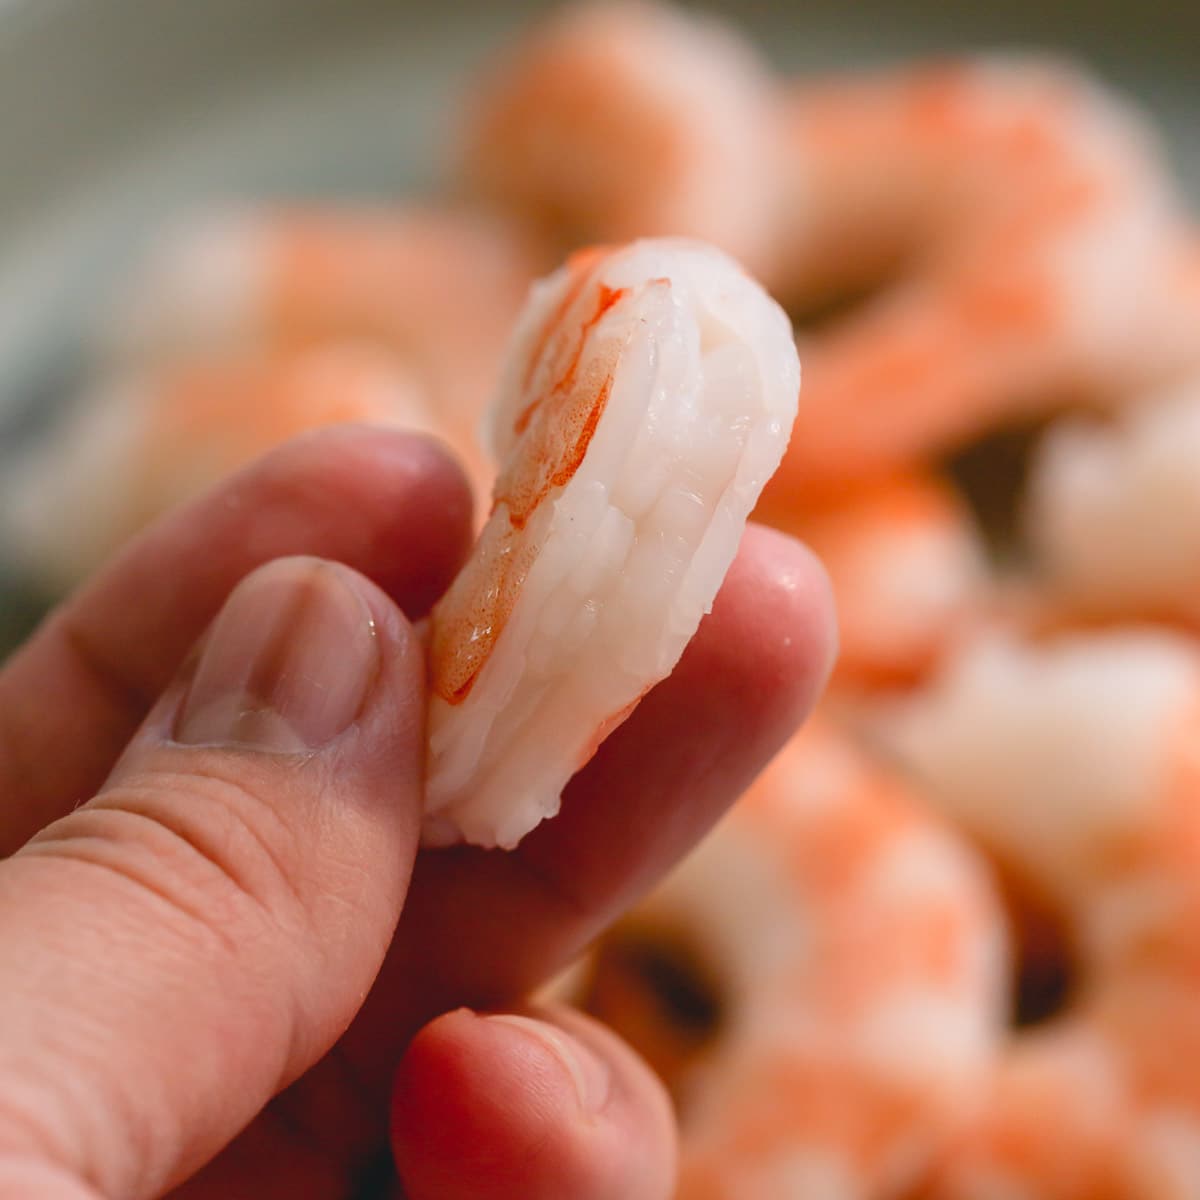 close up of fully cooked deveined shrimp